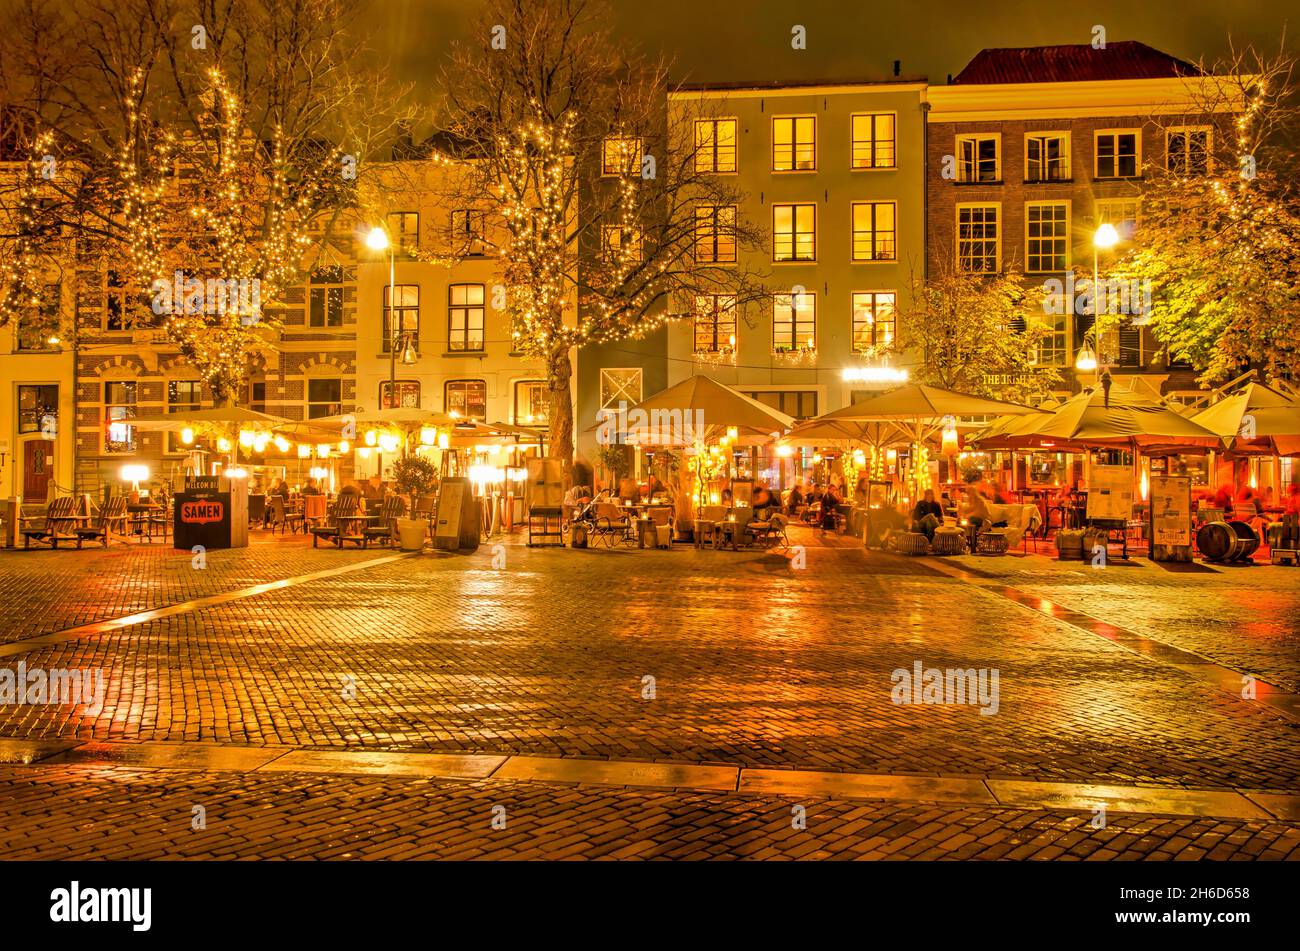 Deventer, The Netherlands, November 13, 2021: historic buildings and outdoor cafes on Brink square after dark Stock Photo